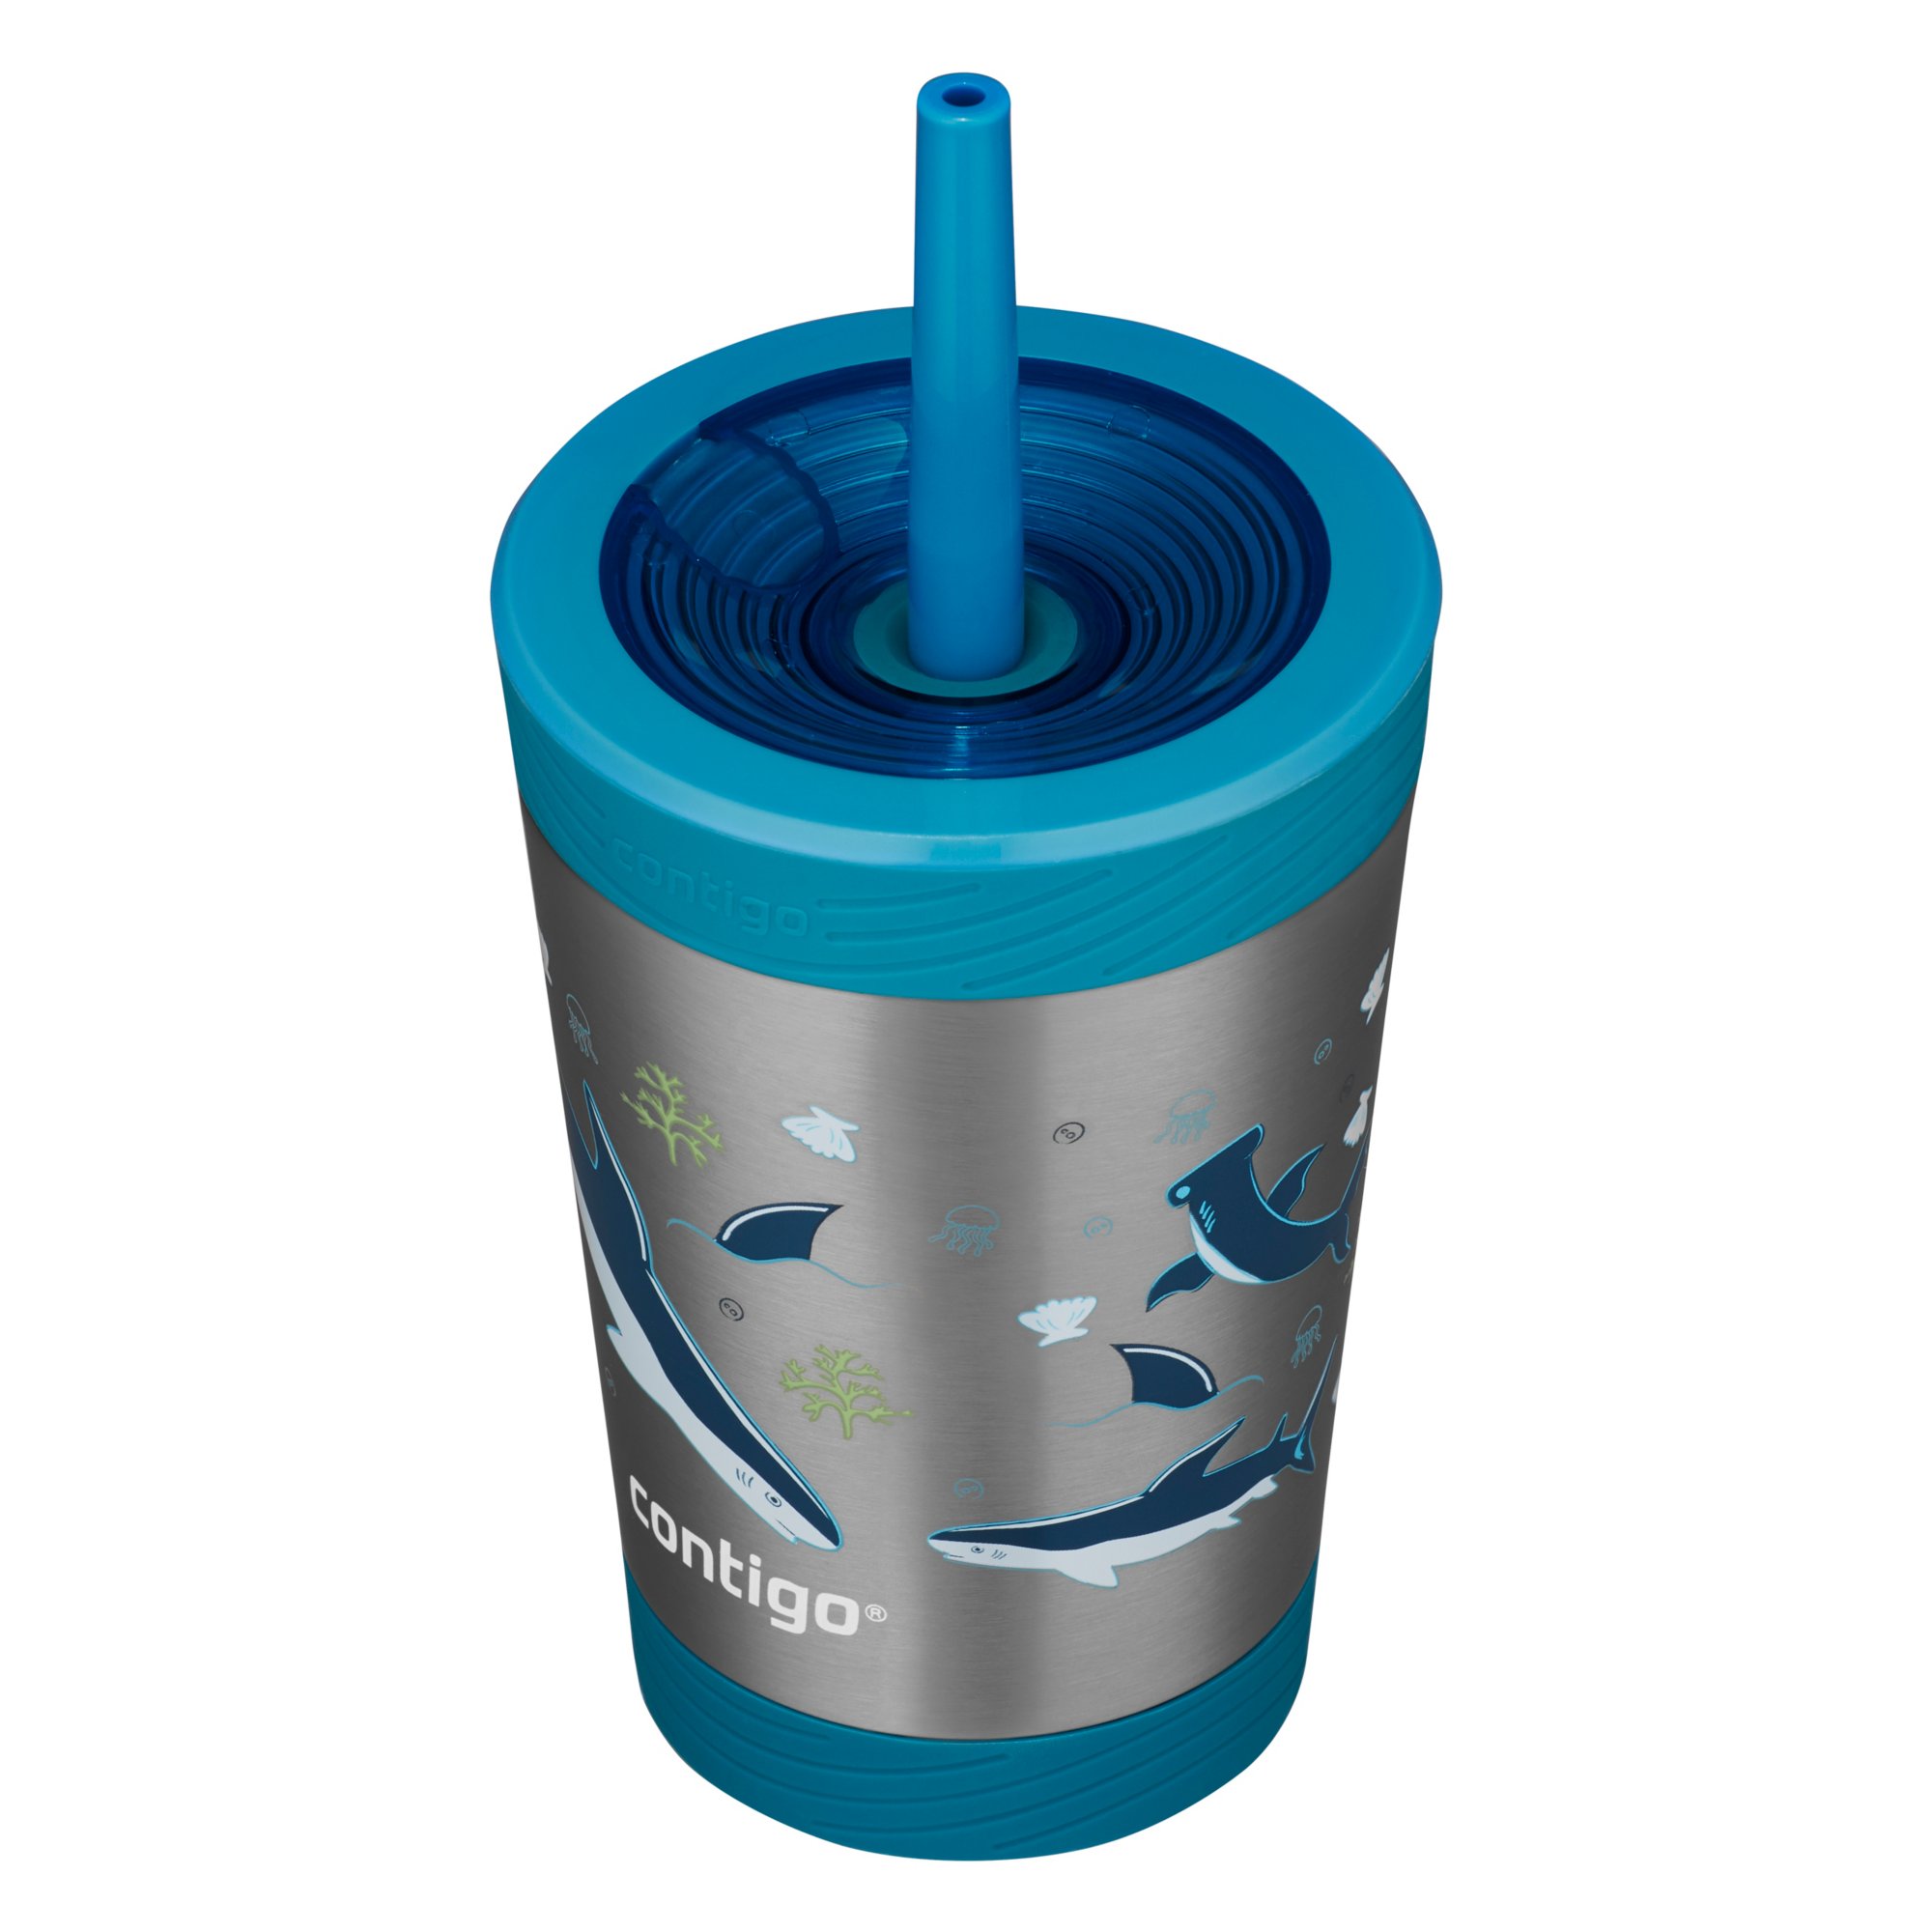 Gripperz™ Spill Proof Cup Holder – Gripperz Spill Proof Products